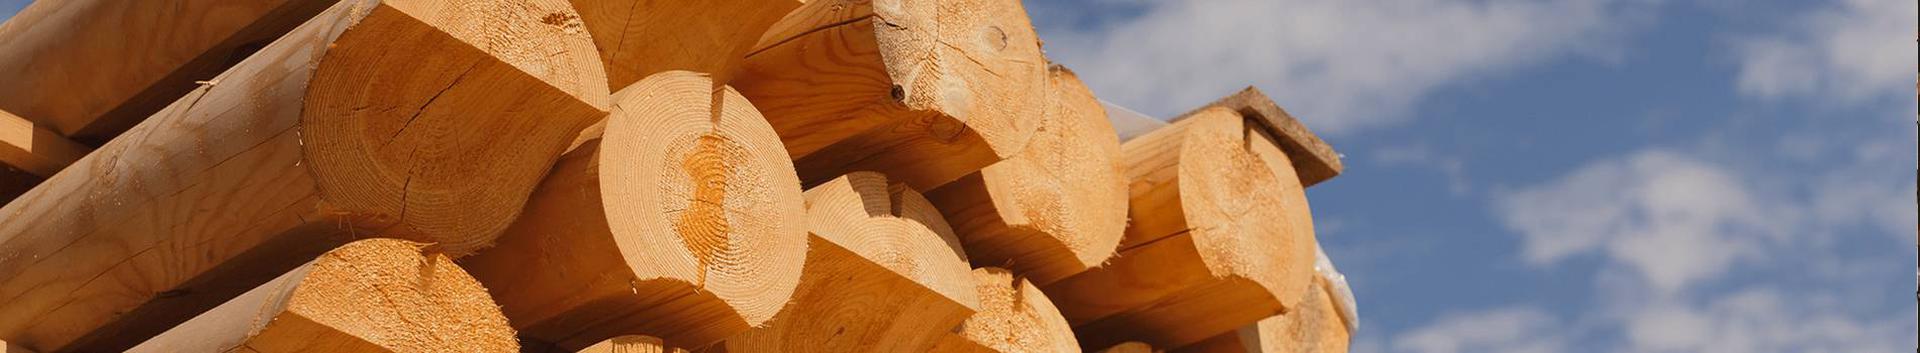 Wood and Paper Industry, wood industry, Sawmills